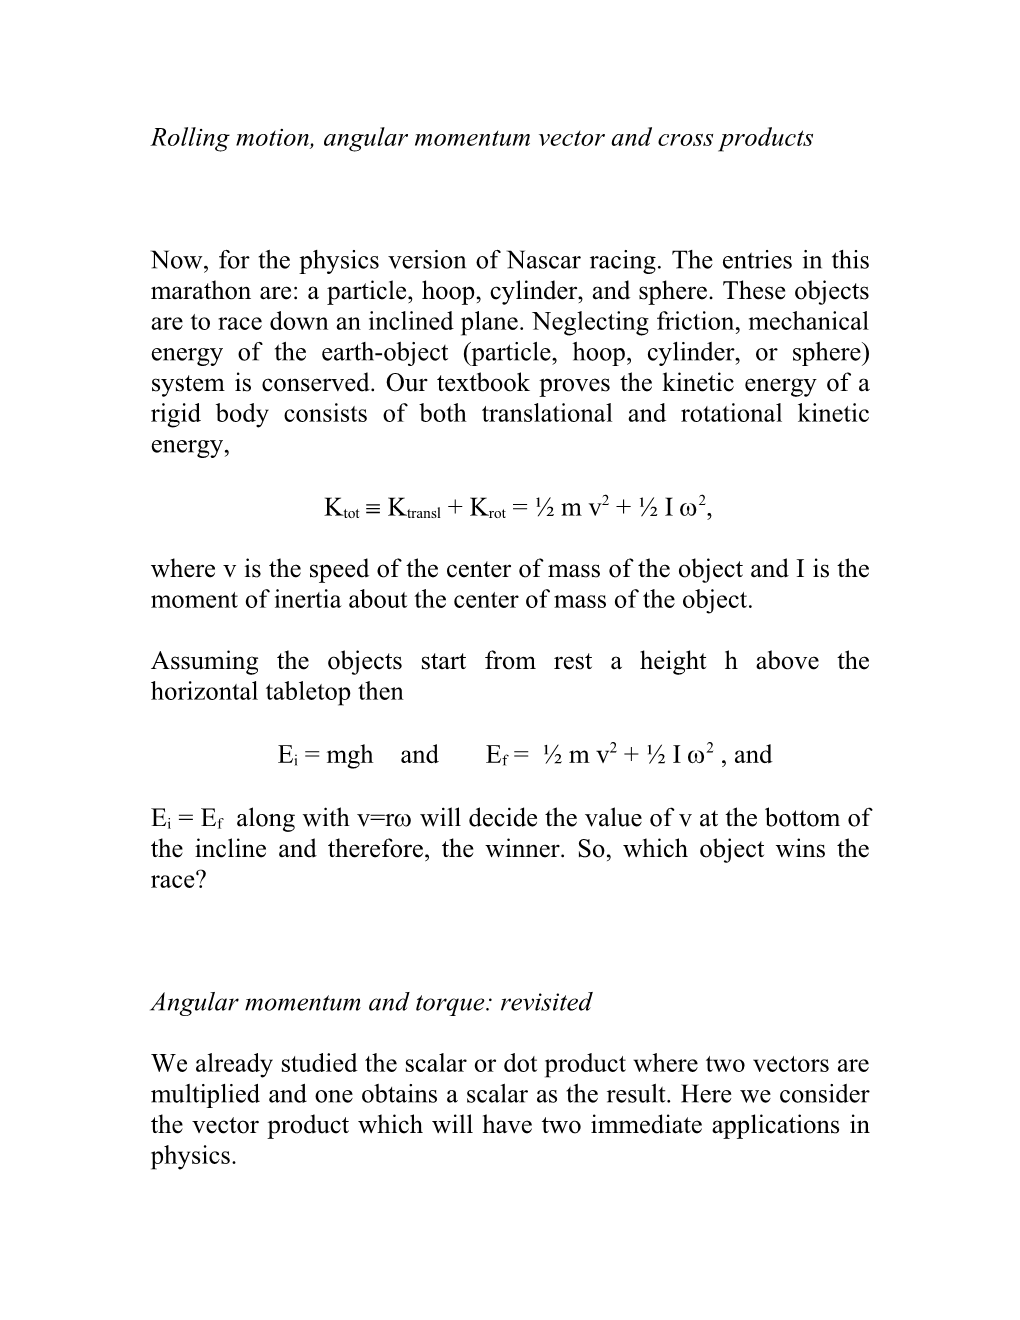 Rolling Motion, Angular Momentum Vector and Cross Products